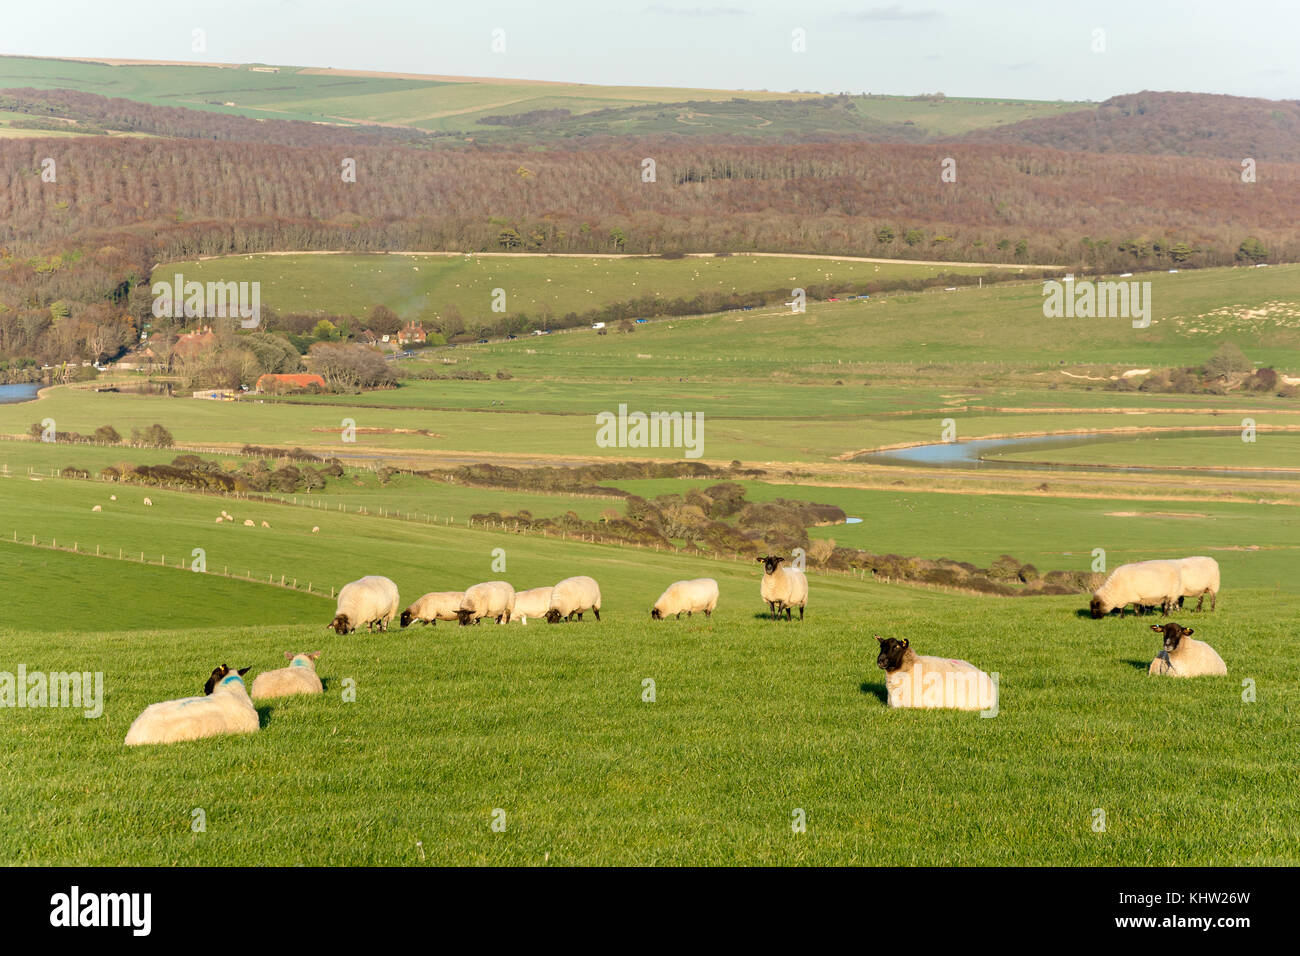 Suffolk sheep in field, Seaford Head Nature Reserve, Seaford, East Sussex, England, United Kingdom Stock Photo